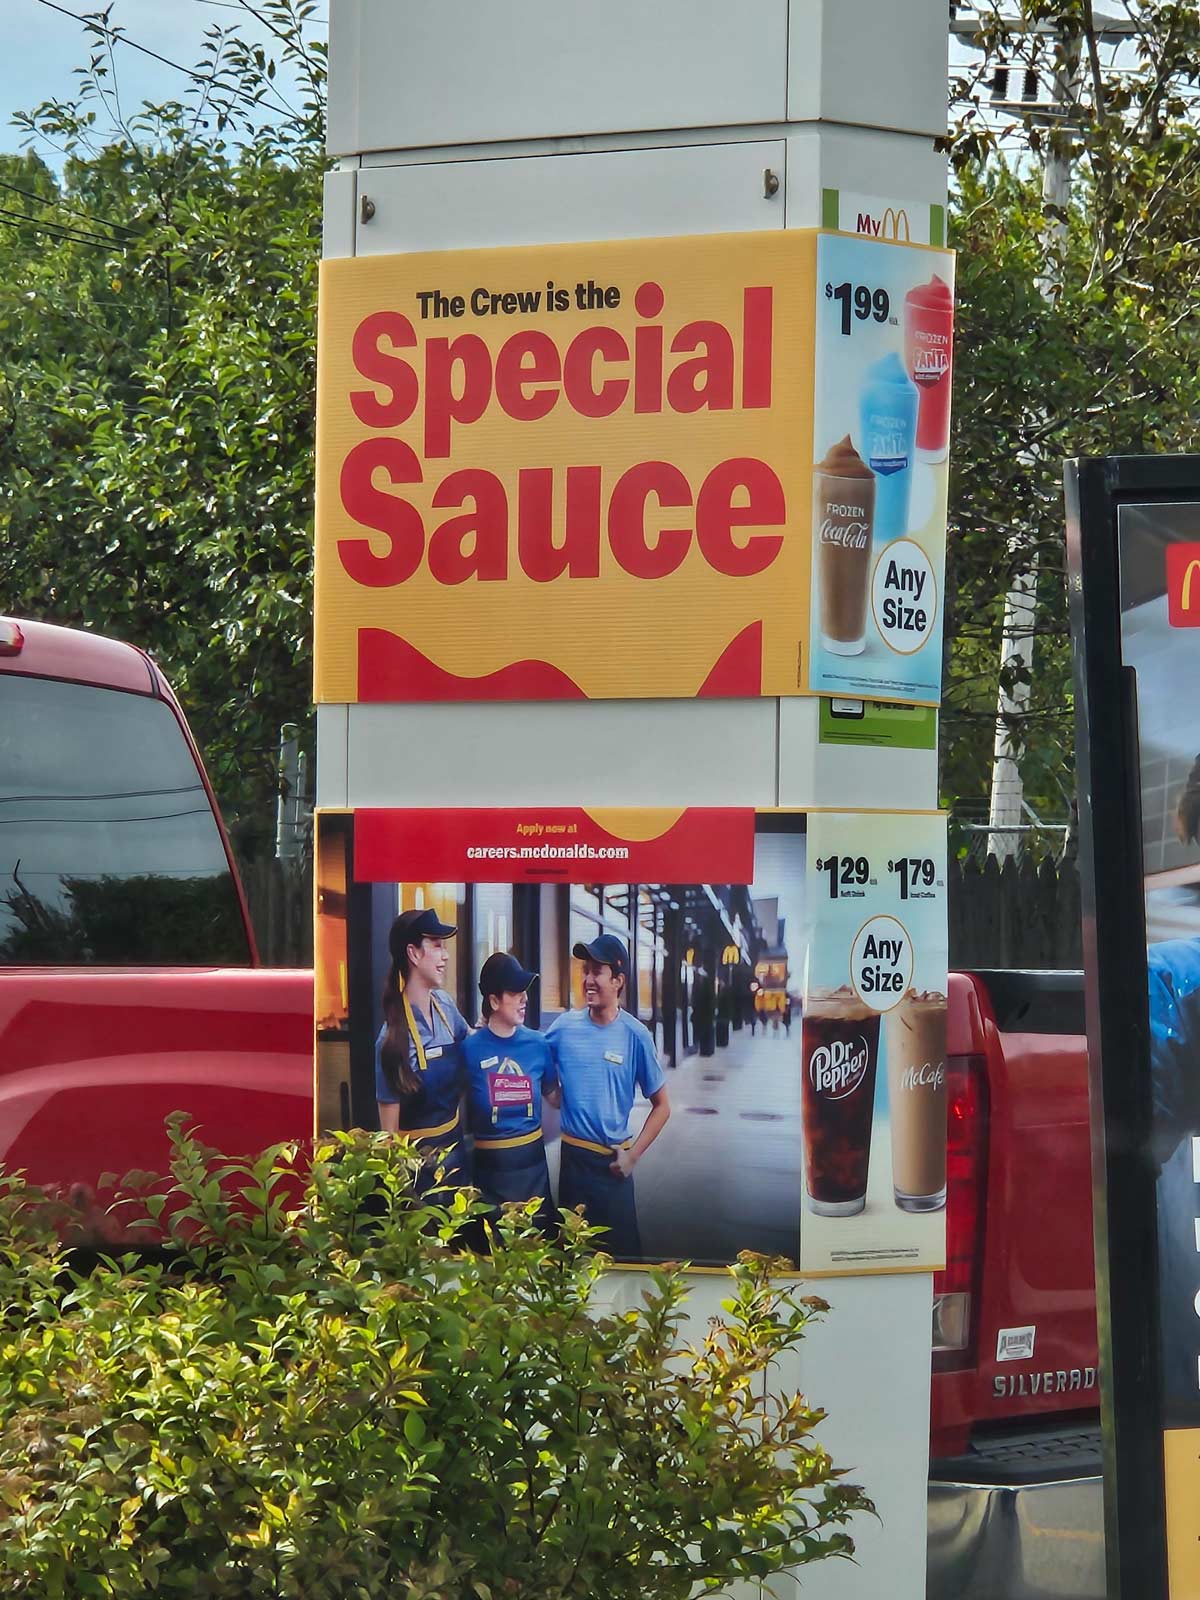 I'm concerned about the special sauce...